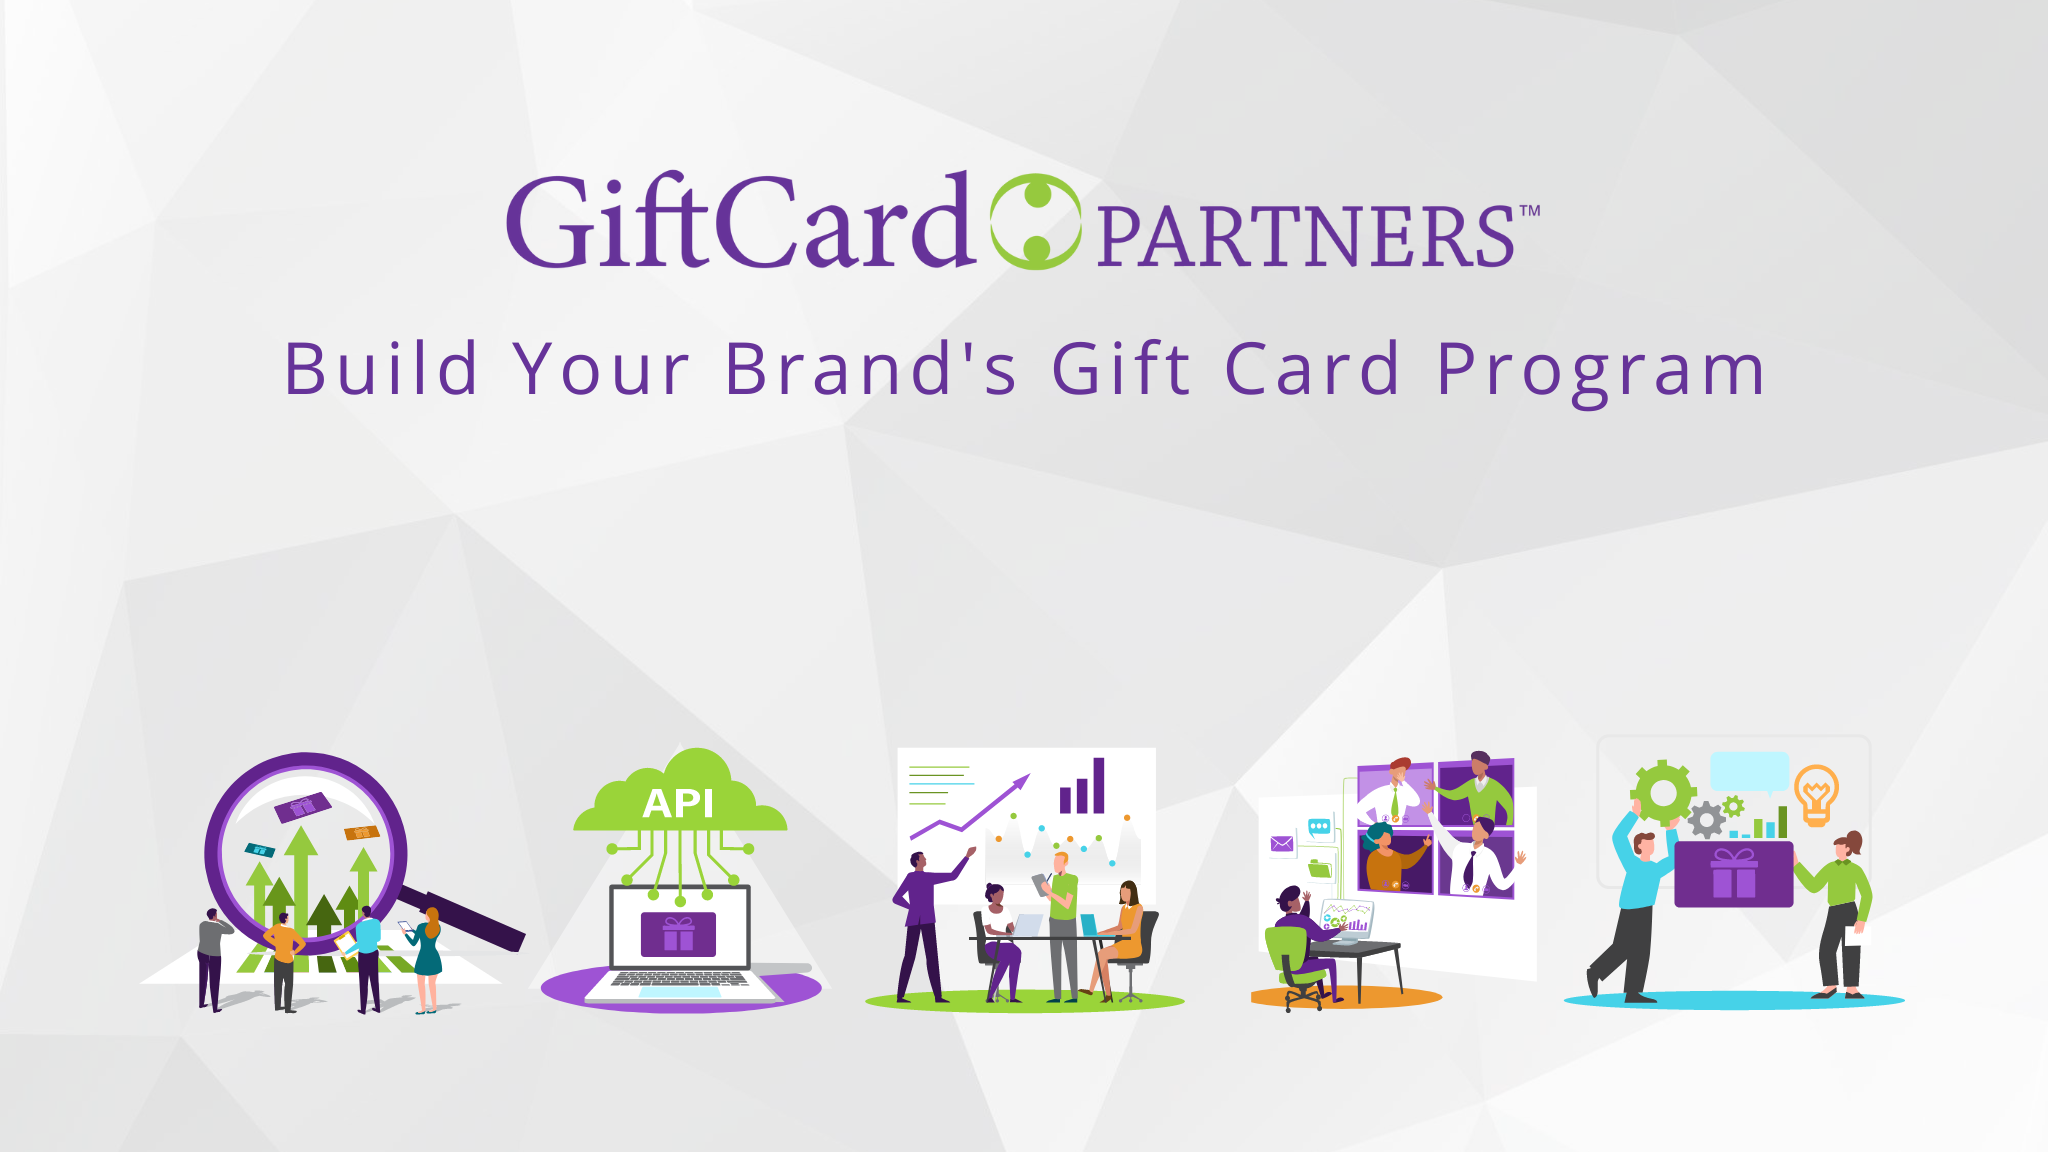 Scales Its B2B Gift Card Program by Expanding Partnership